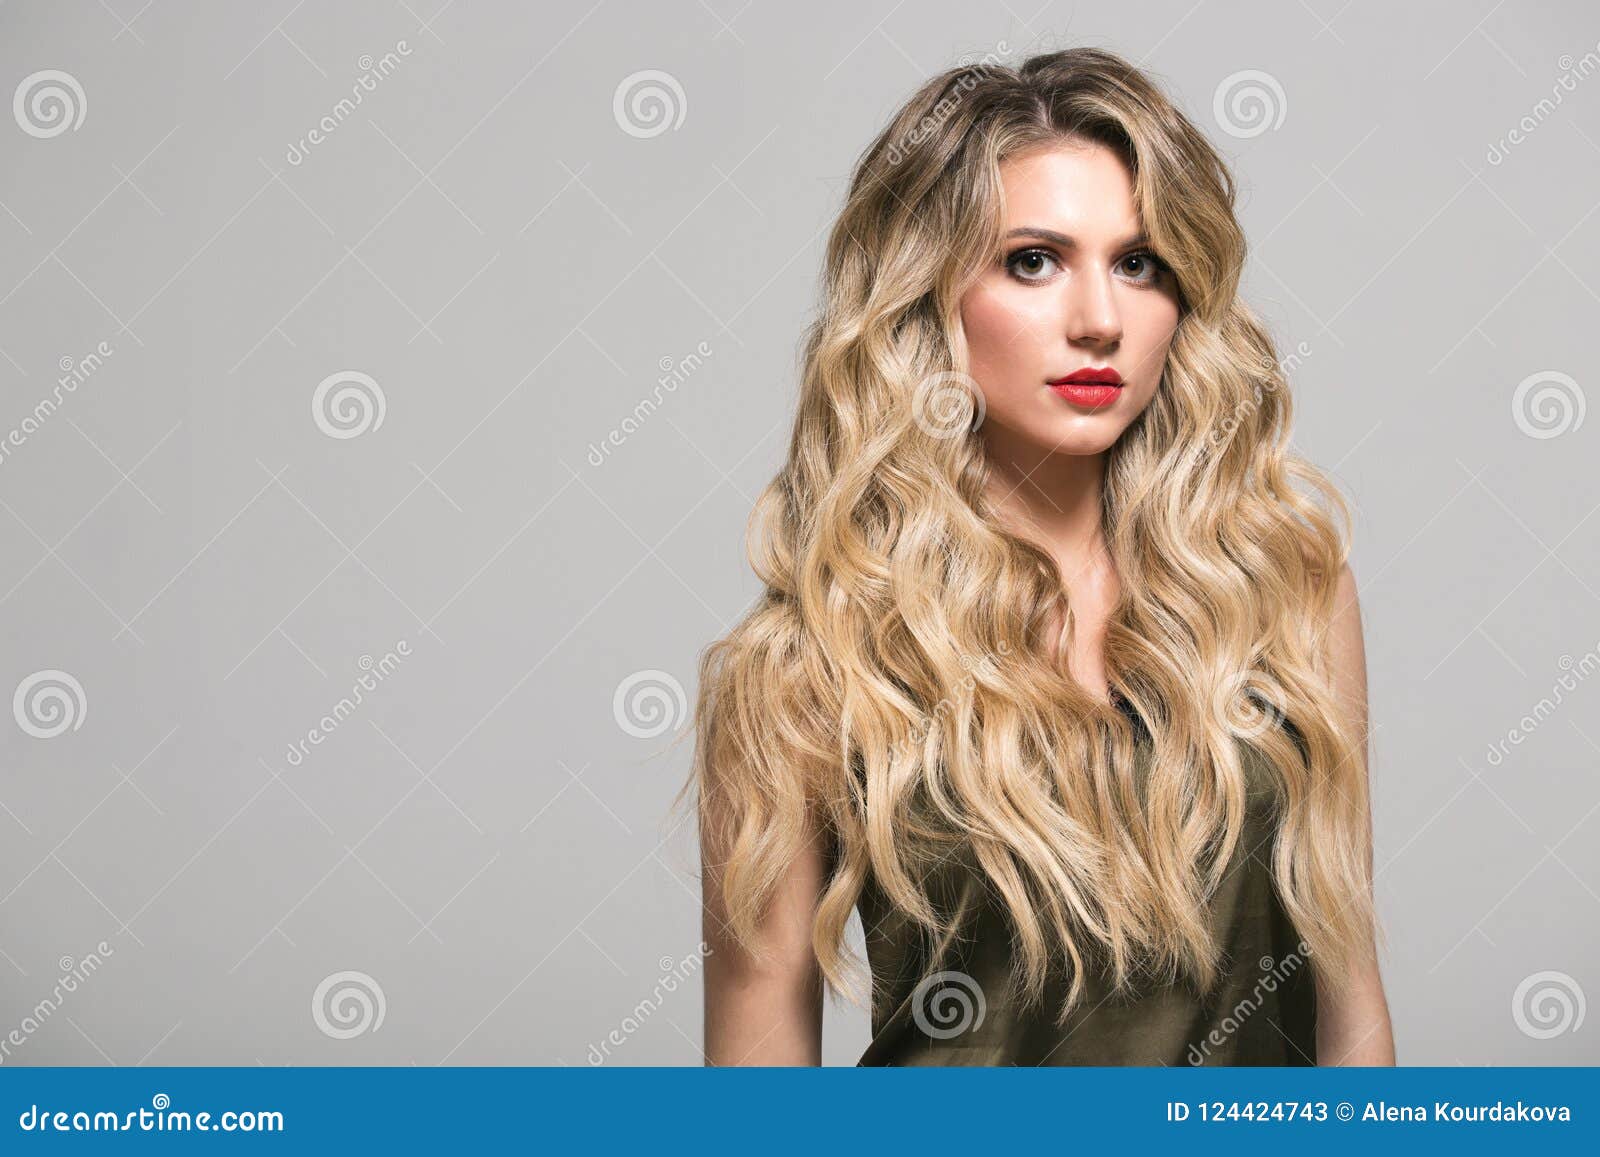 Long blonde hair girl with wavy hair - wide 7